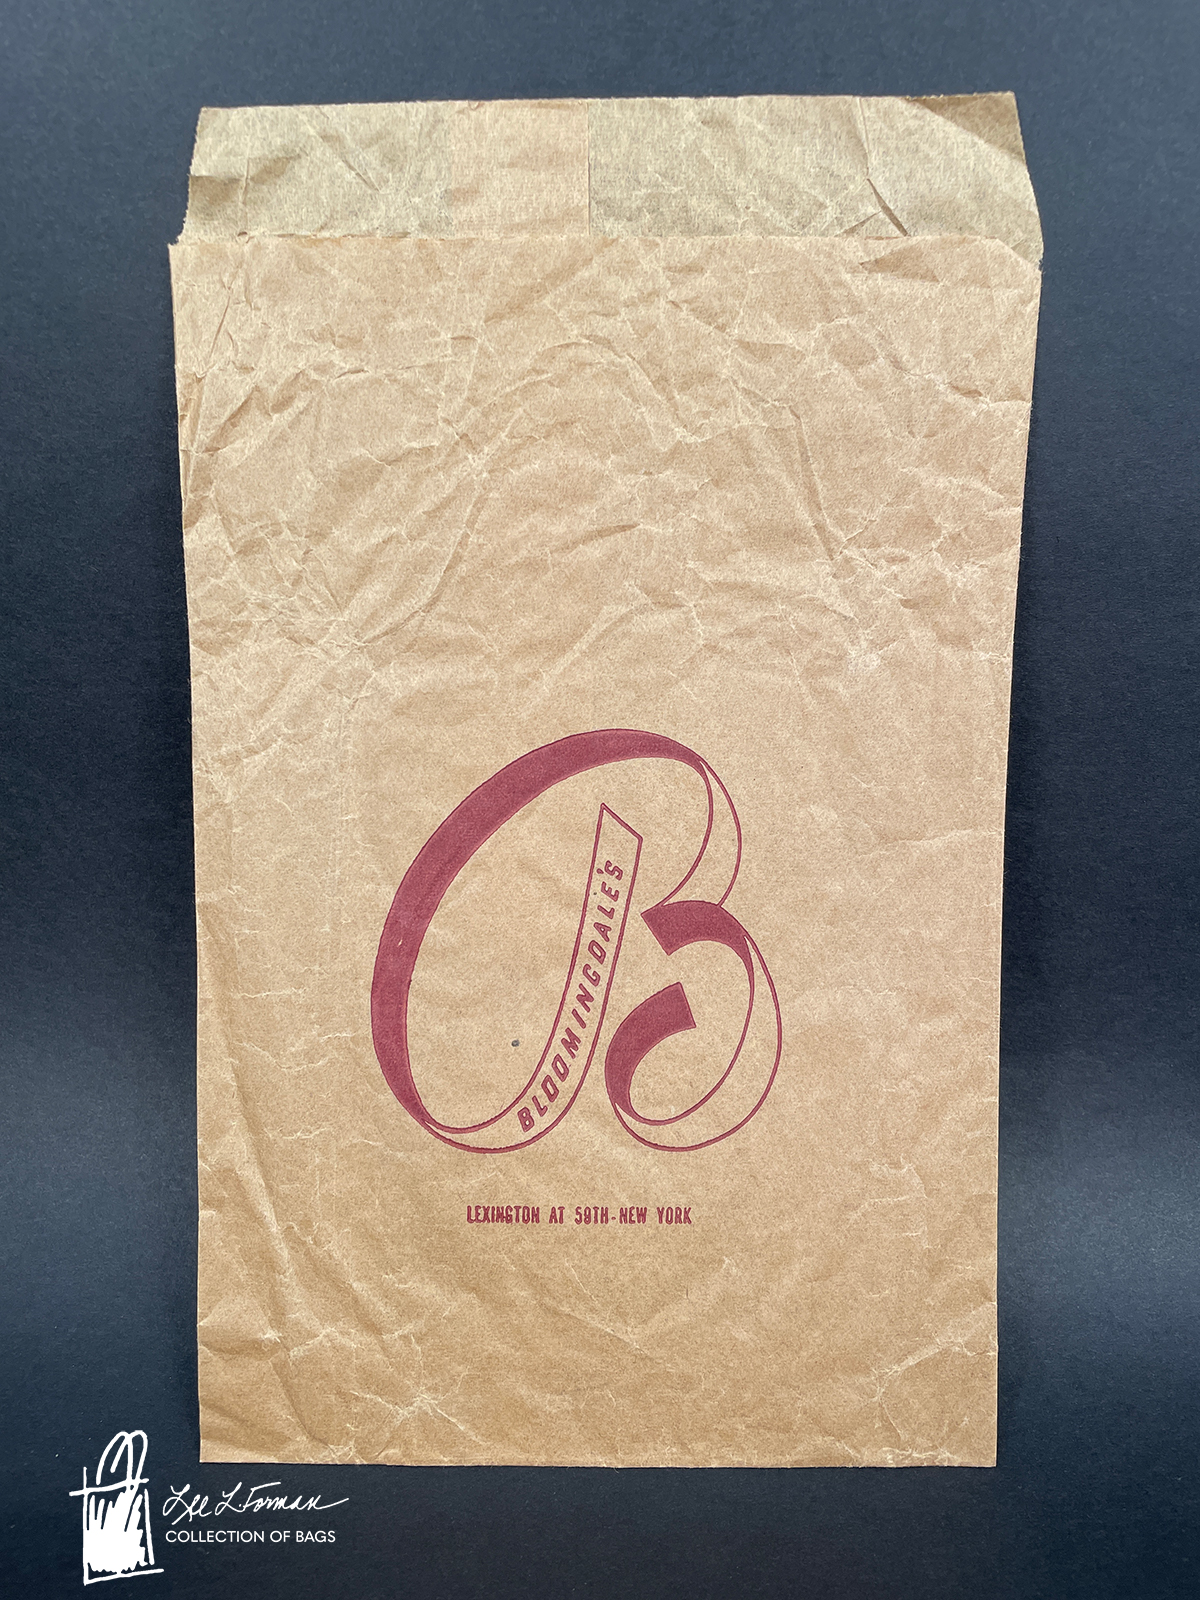 5/365: Lee L. Forman was 21 when she first began collecting bags, initially focusing on Bloomingdale's bags. The oldest among these is a 1950s-era brown paper sleeve featuring a large script 